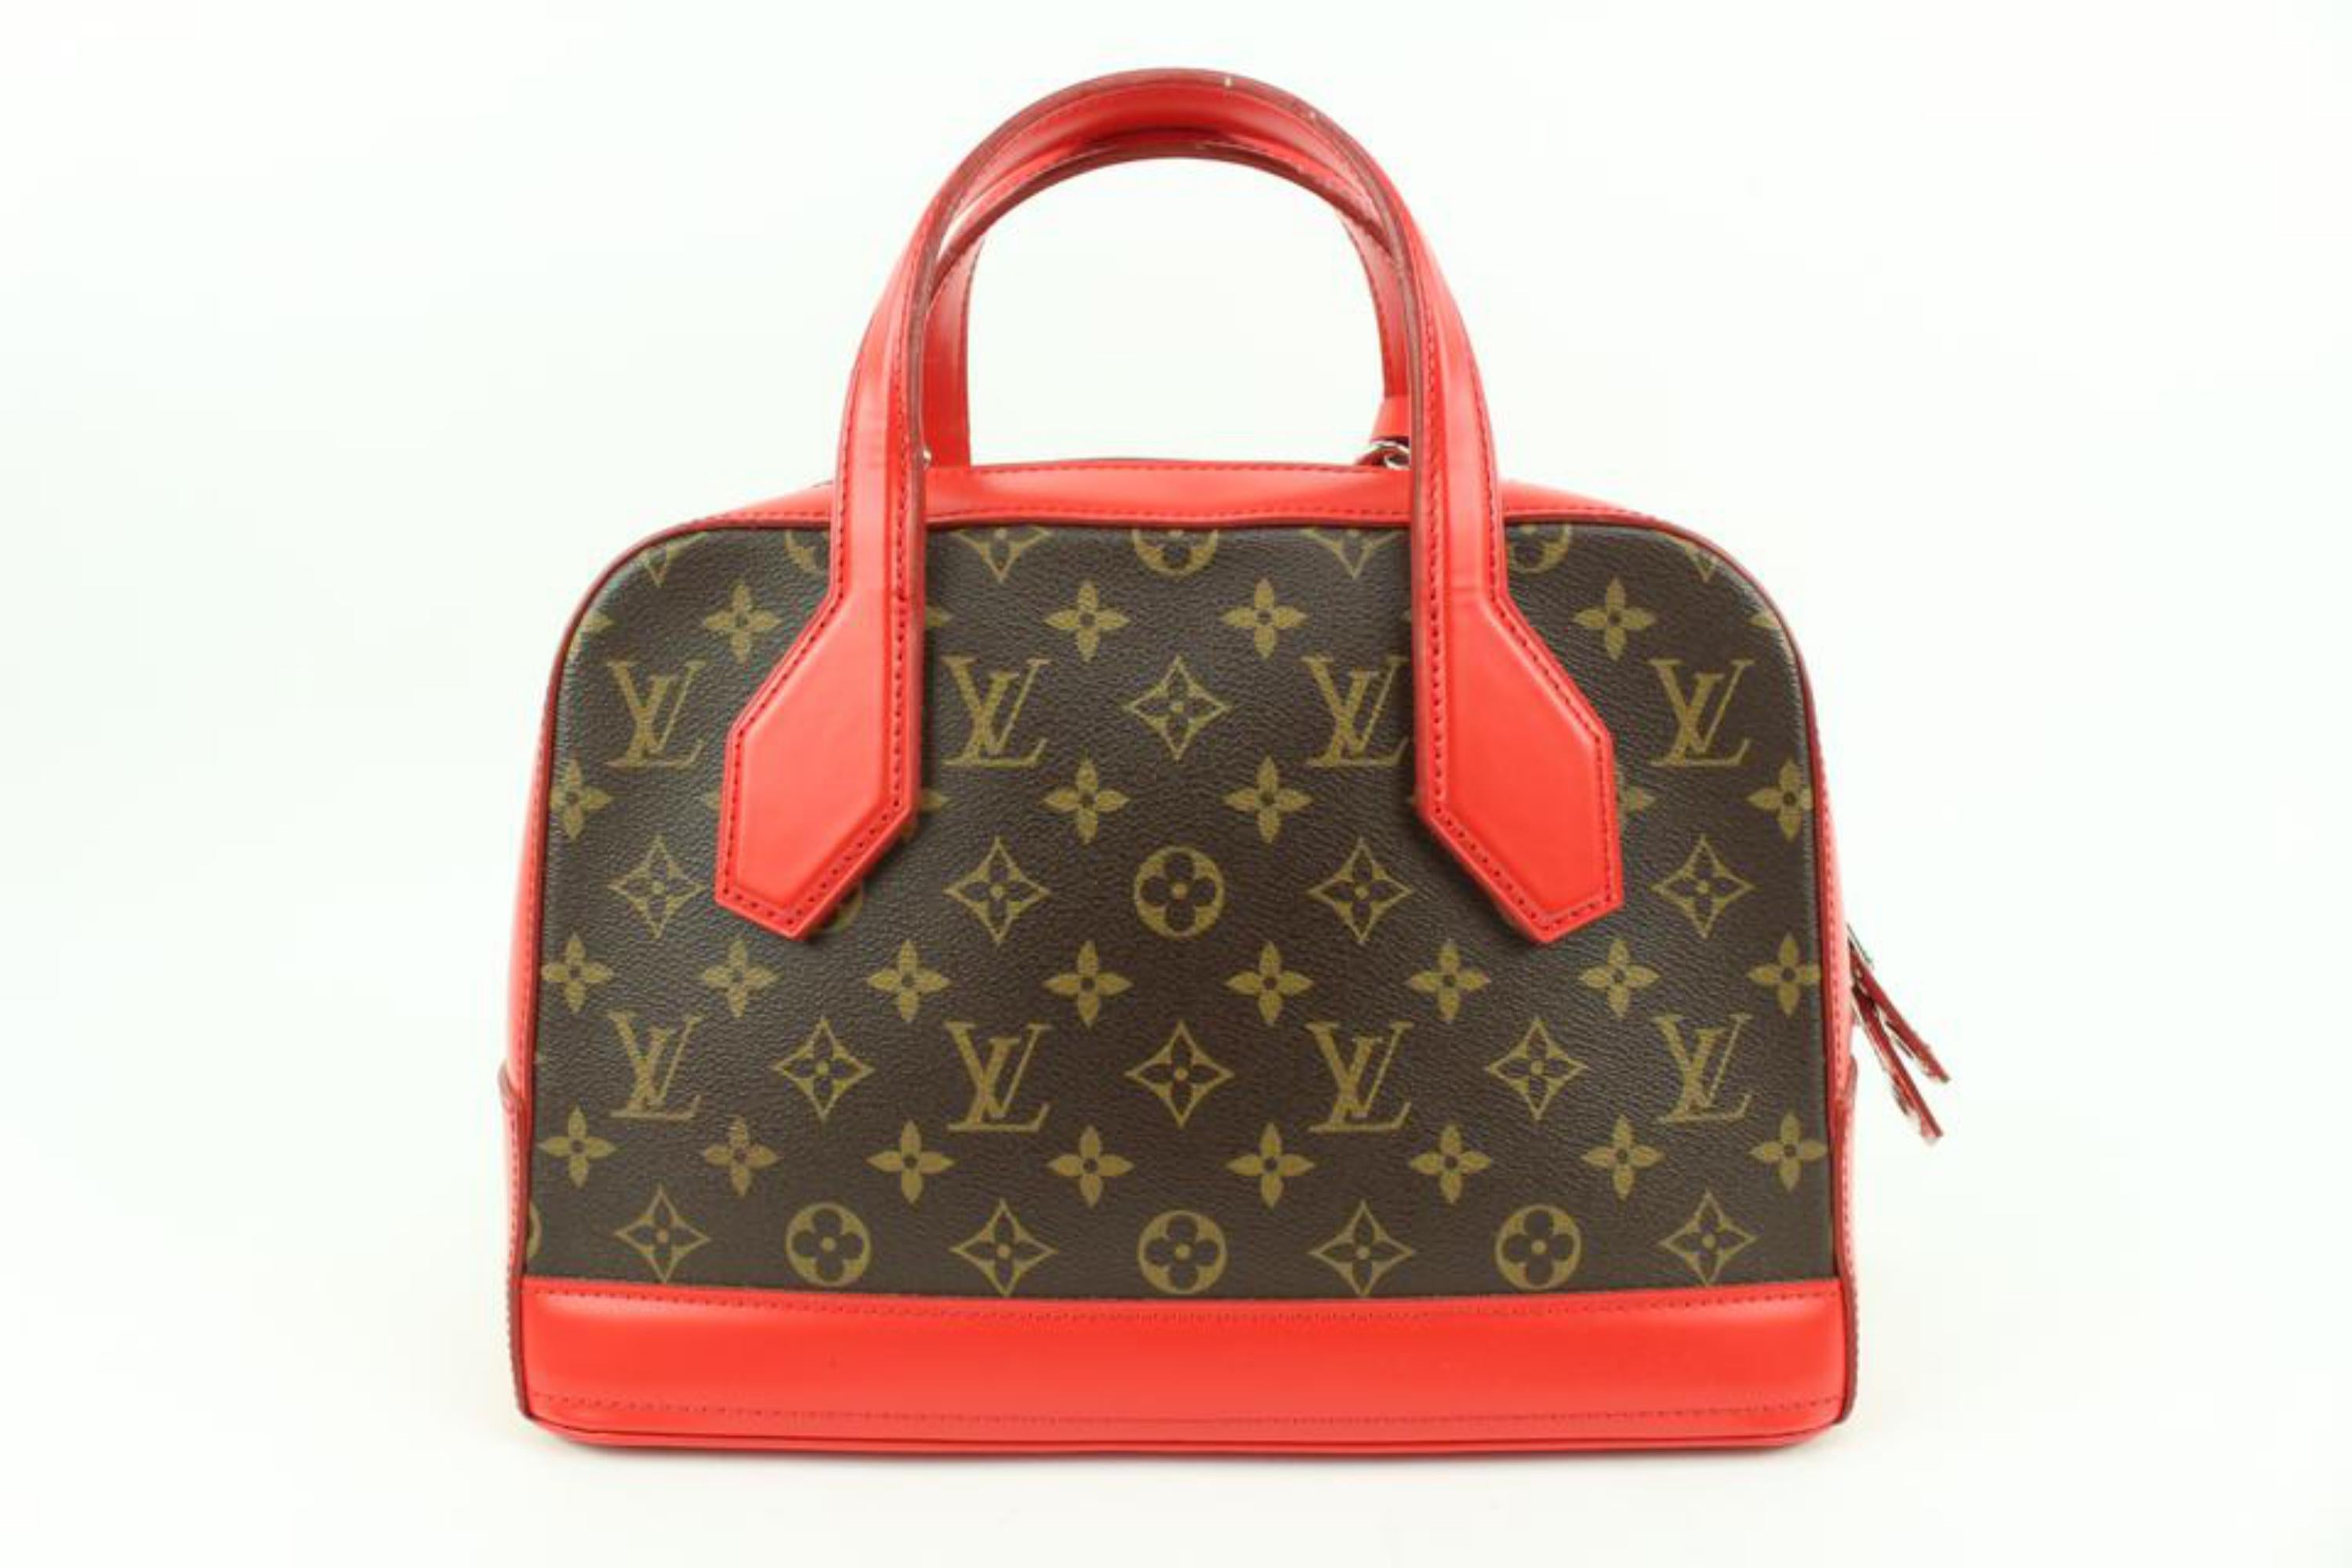 Louis Vuitton Red Monogram Dora PM Dome 2way Satchel Bag  10lk516s In Excellent Condition For Sale In Dix hills, NY